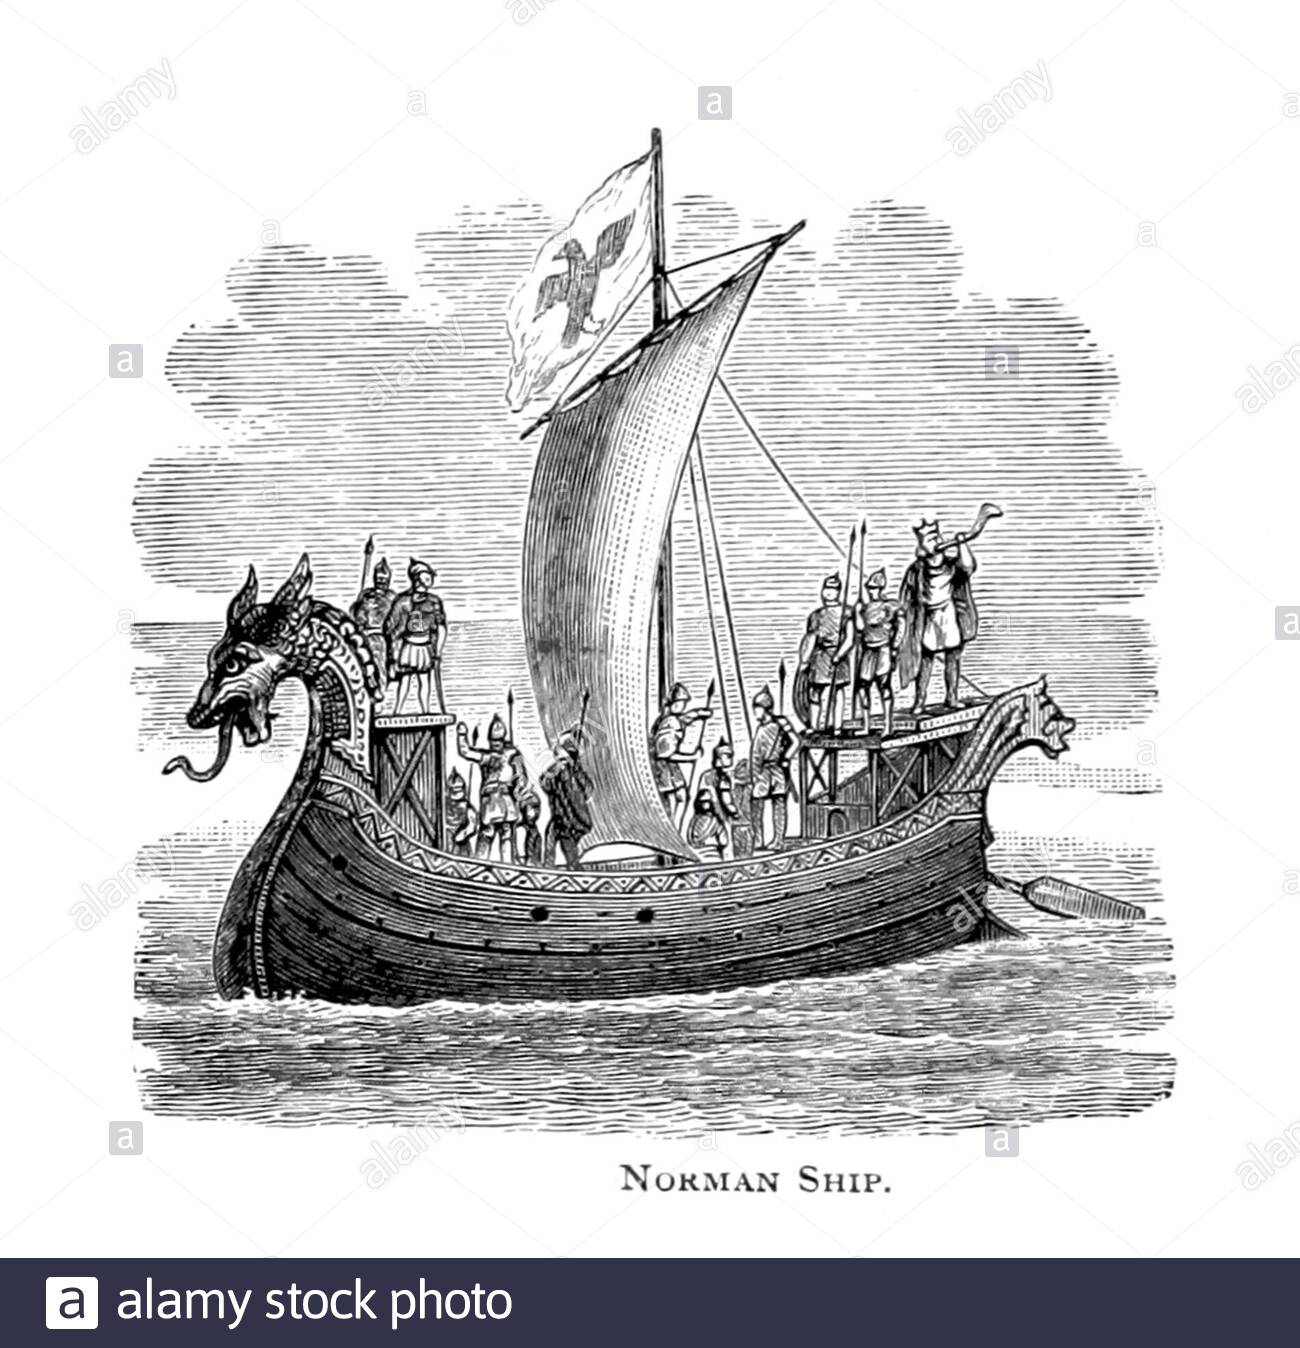 Norman Ship, vintage illustration from 1884 Stock Photo